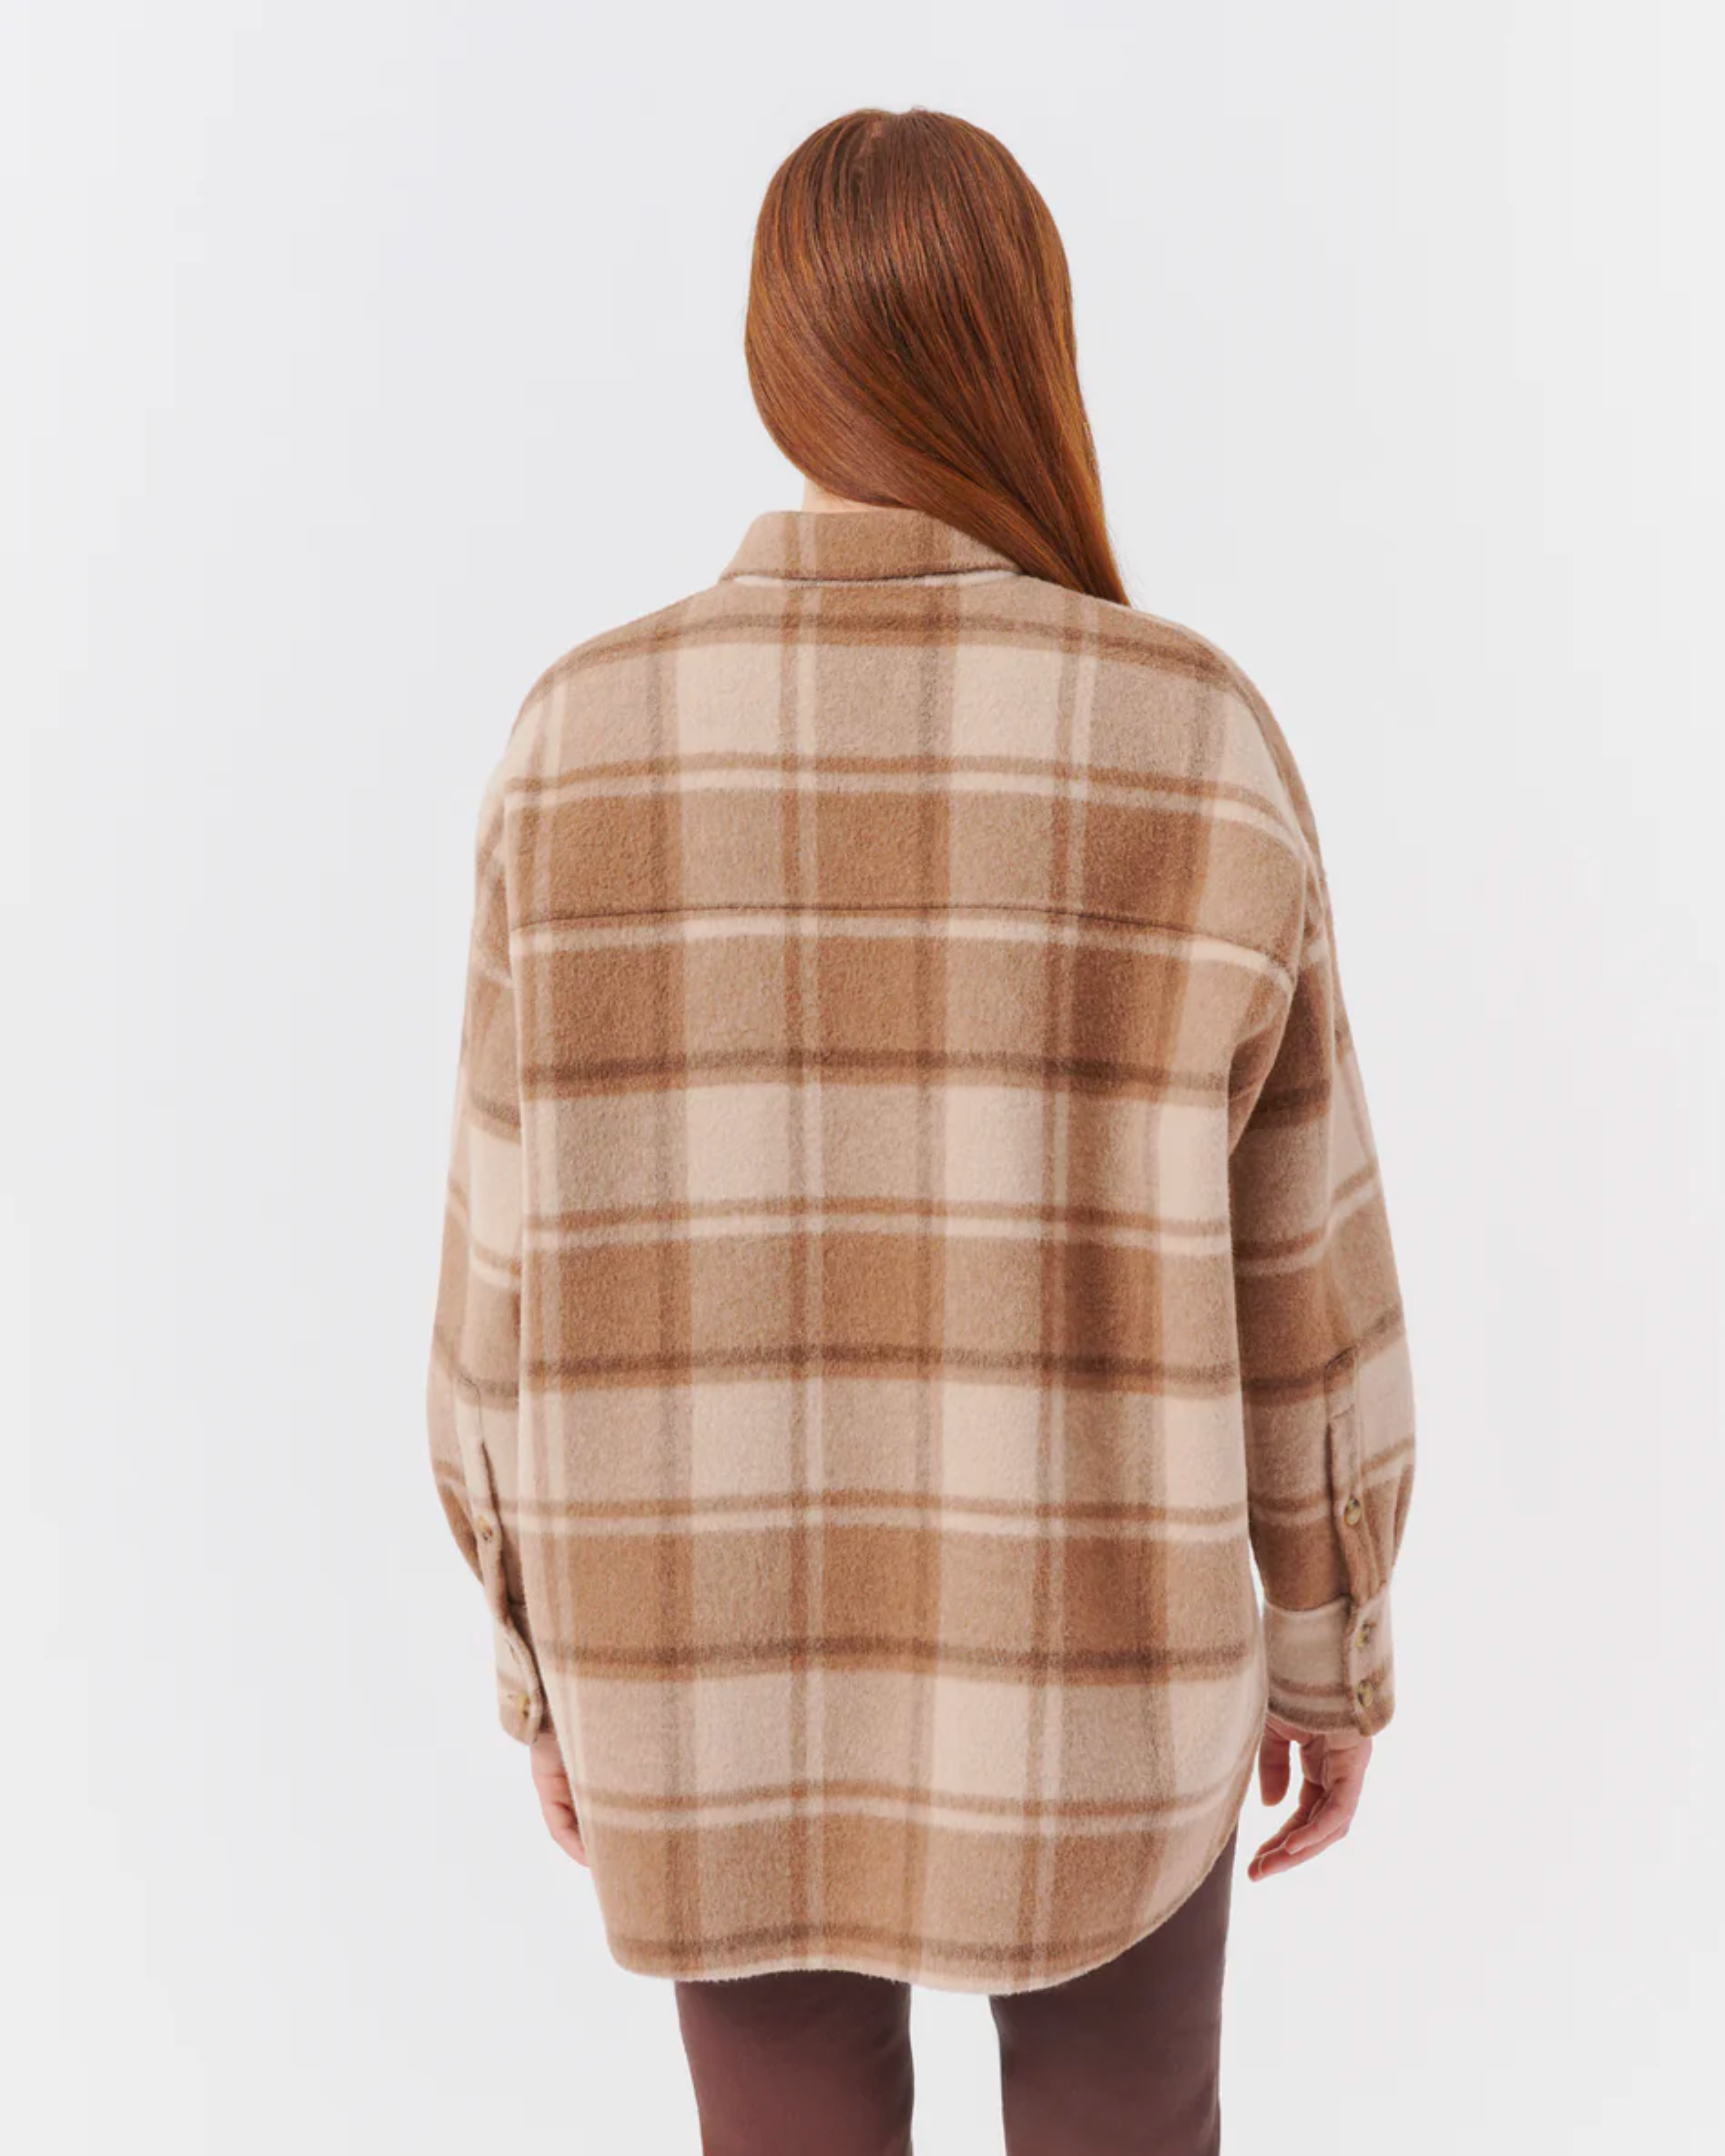 ATM Plaid Flannel Tomboy Shirt in Natural Beige